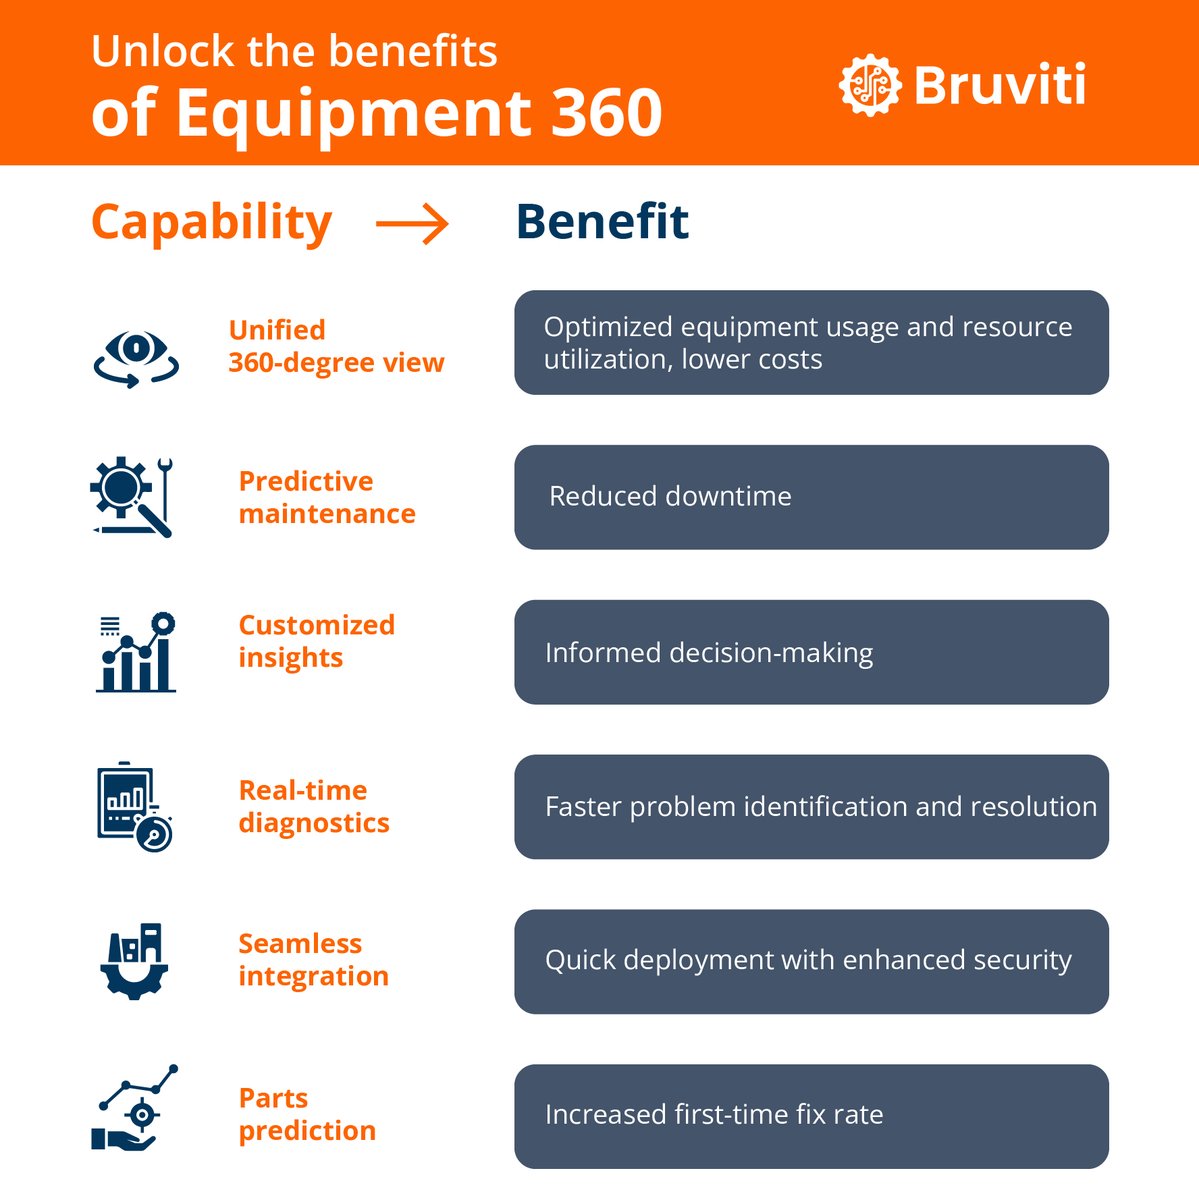 A 360-degree equipment view can improve your operations, reduce costs, and improve #customer satisfaction. The #future of equipment management is here and it’s smarter, faster, better. #Equipment360 #rt #AI #PredictiveMaintenance #bruviti #cx